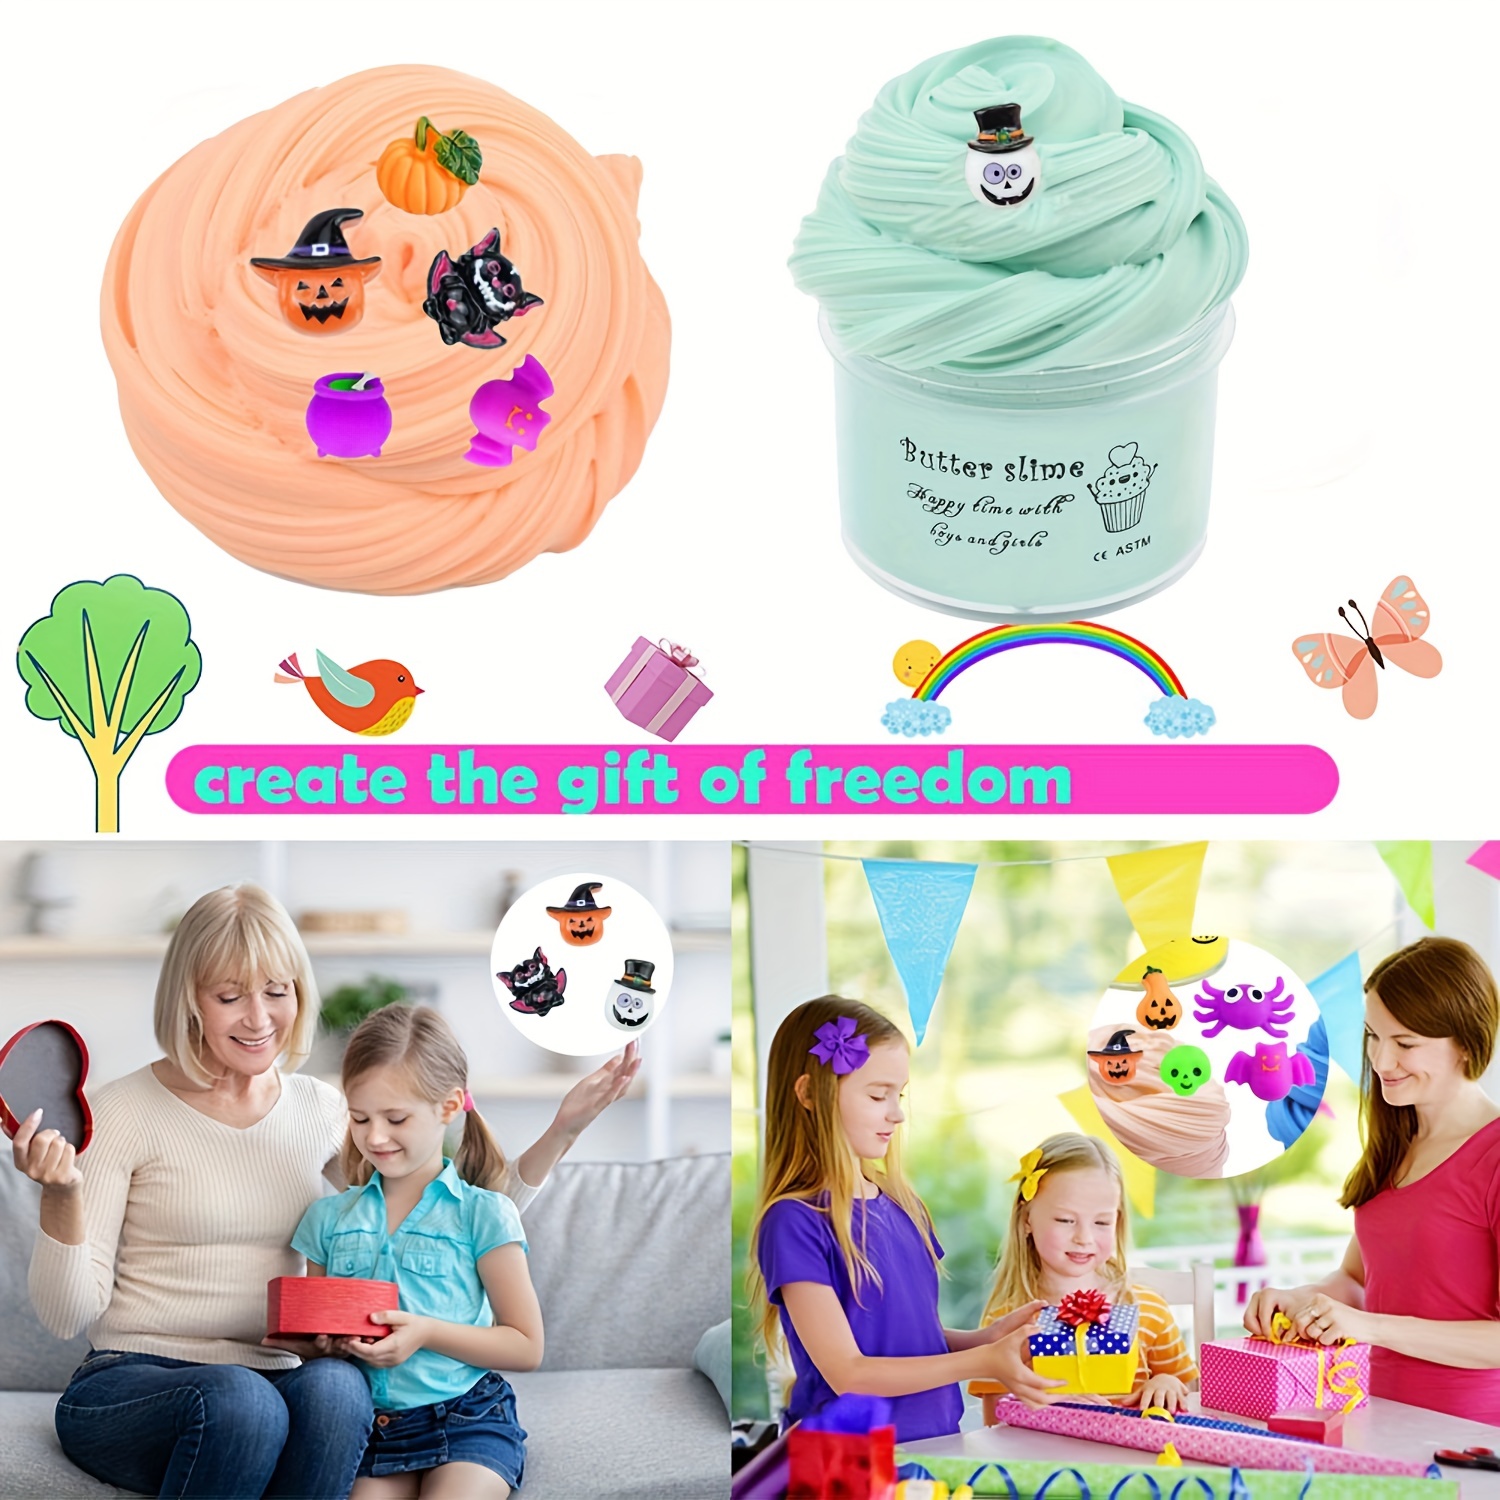 Squishy & Slime Birthday Party  Squishy and Slime Birthday Party